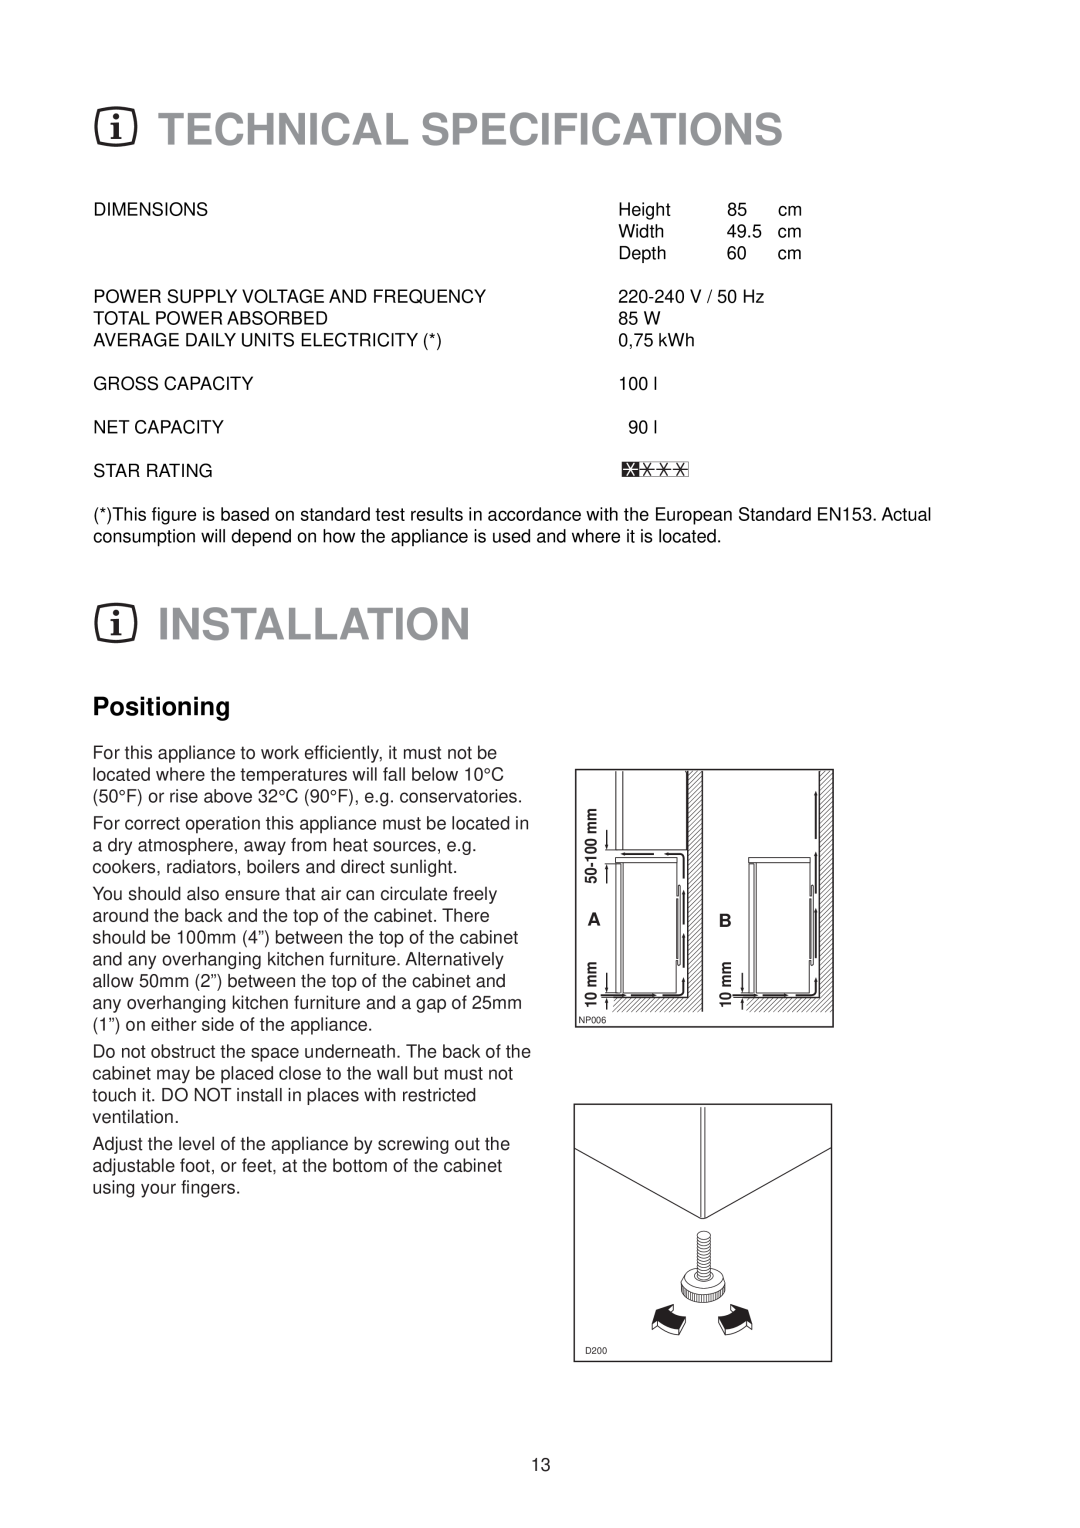 Zanussi CF 50 SI manual Technical Specifications, Installation, Positioning 